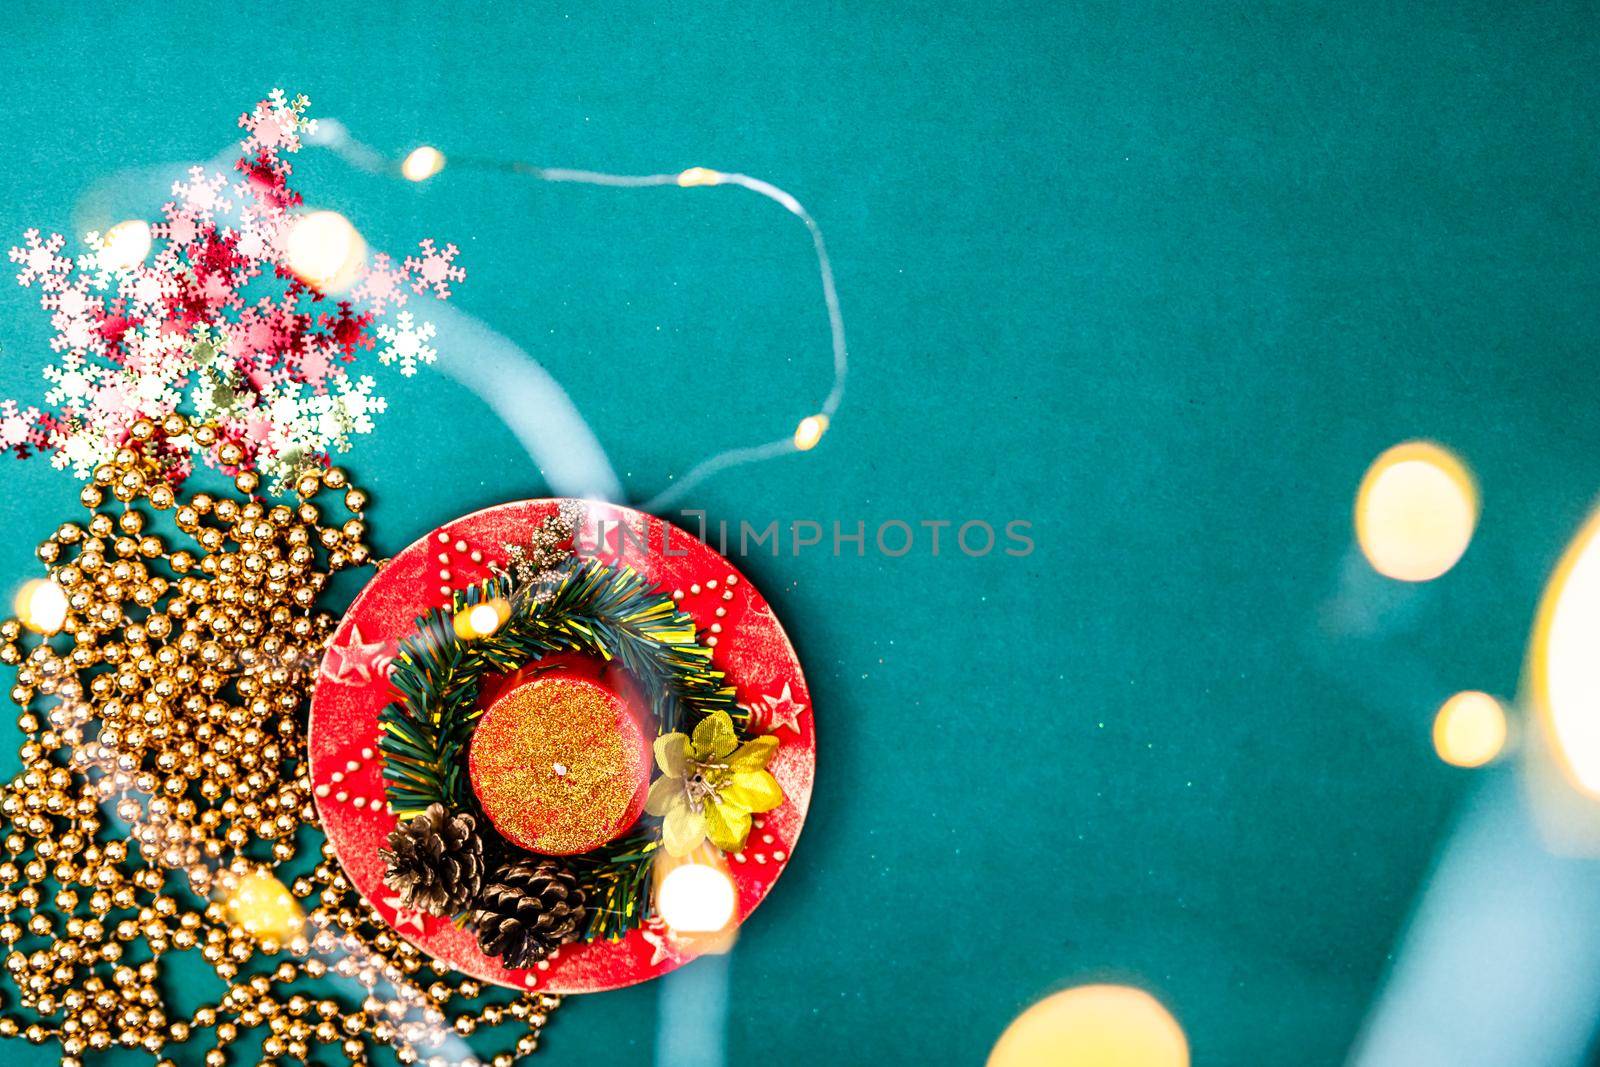 Christmas lights over a december season composition with ornaments and decorations. Top view with copy space on green background. by vladispas